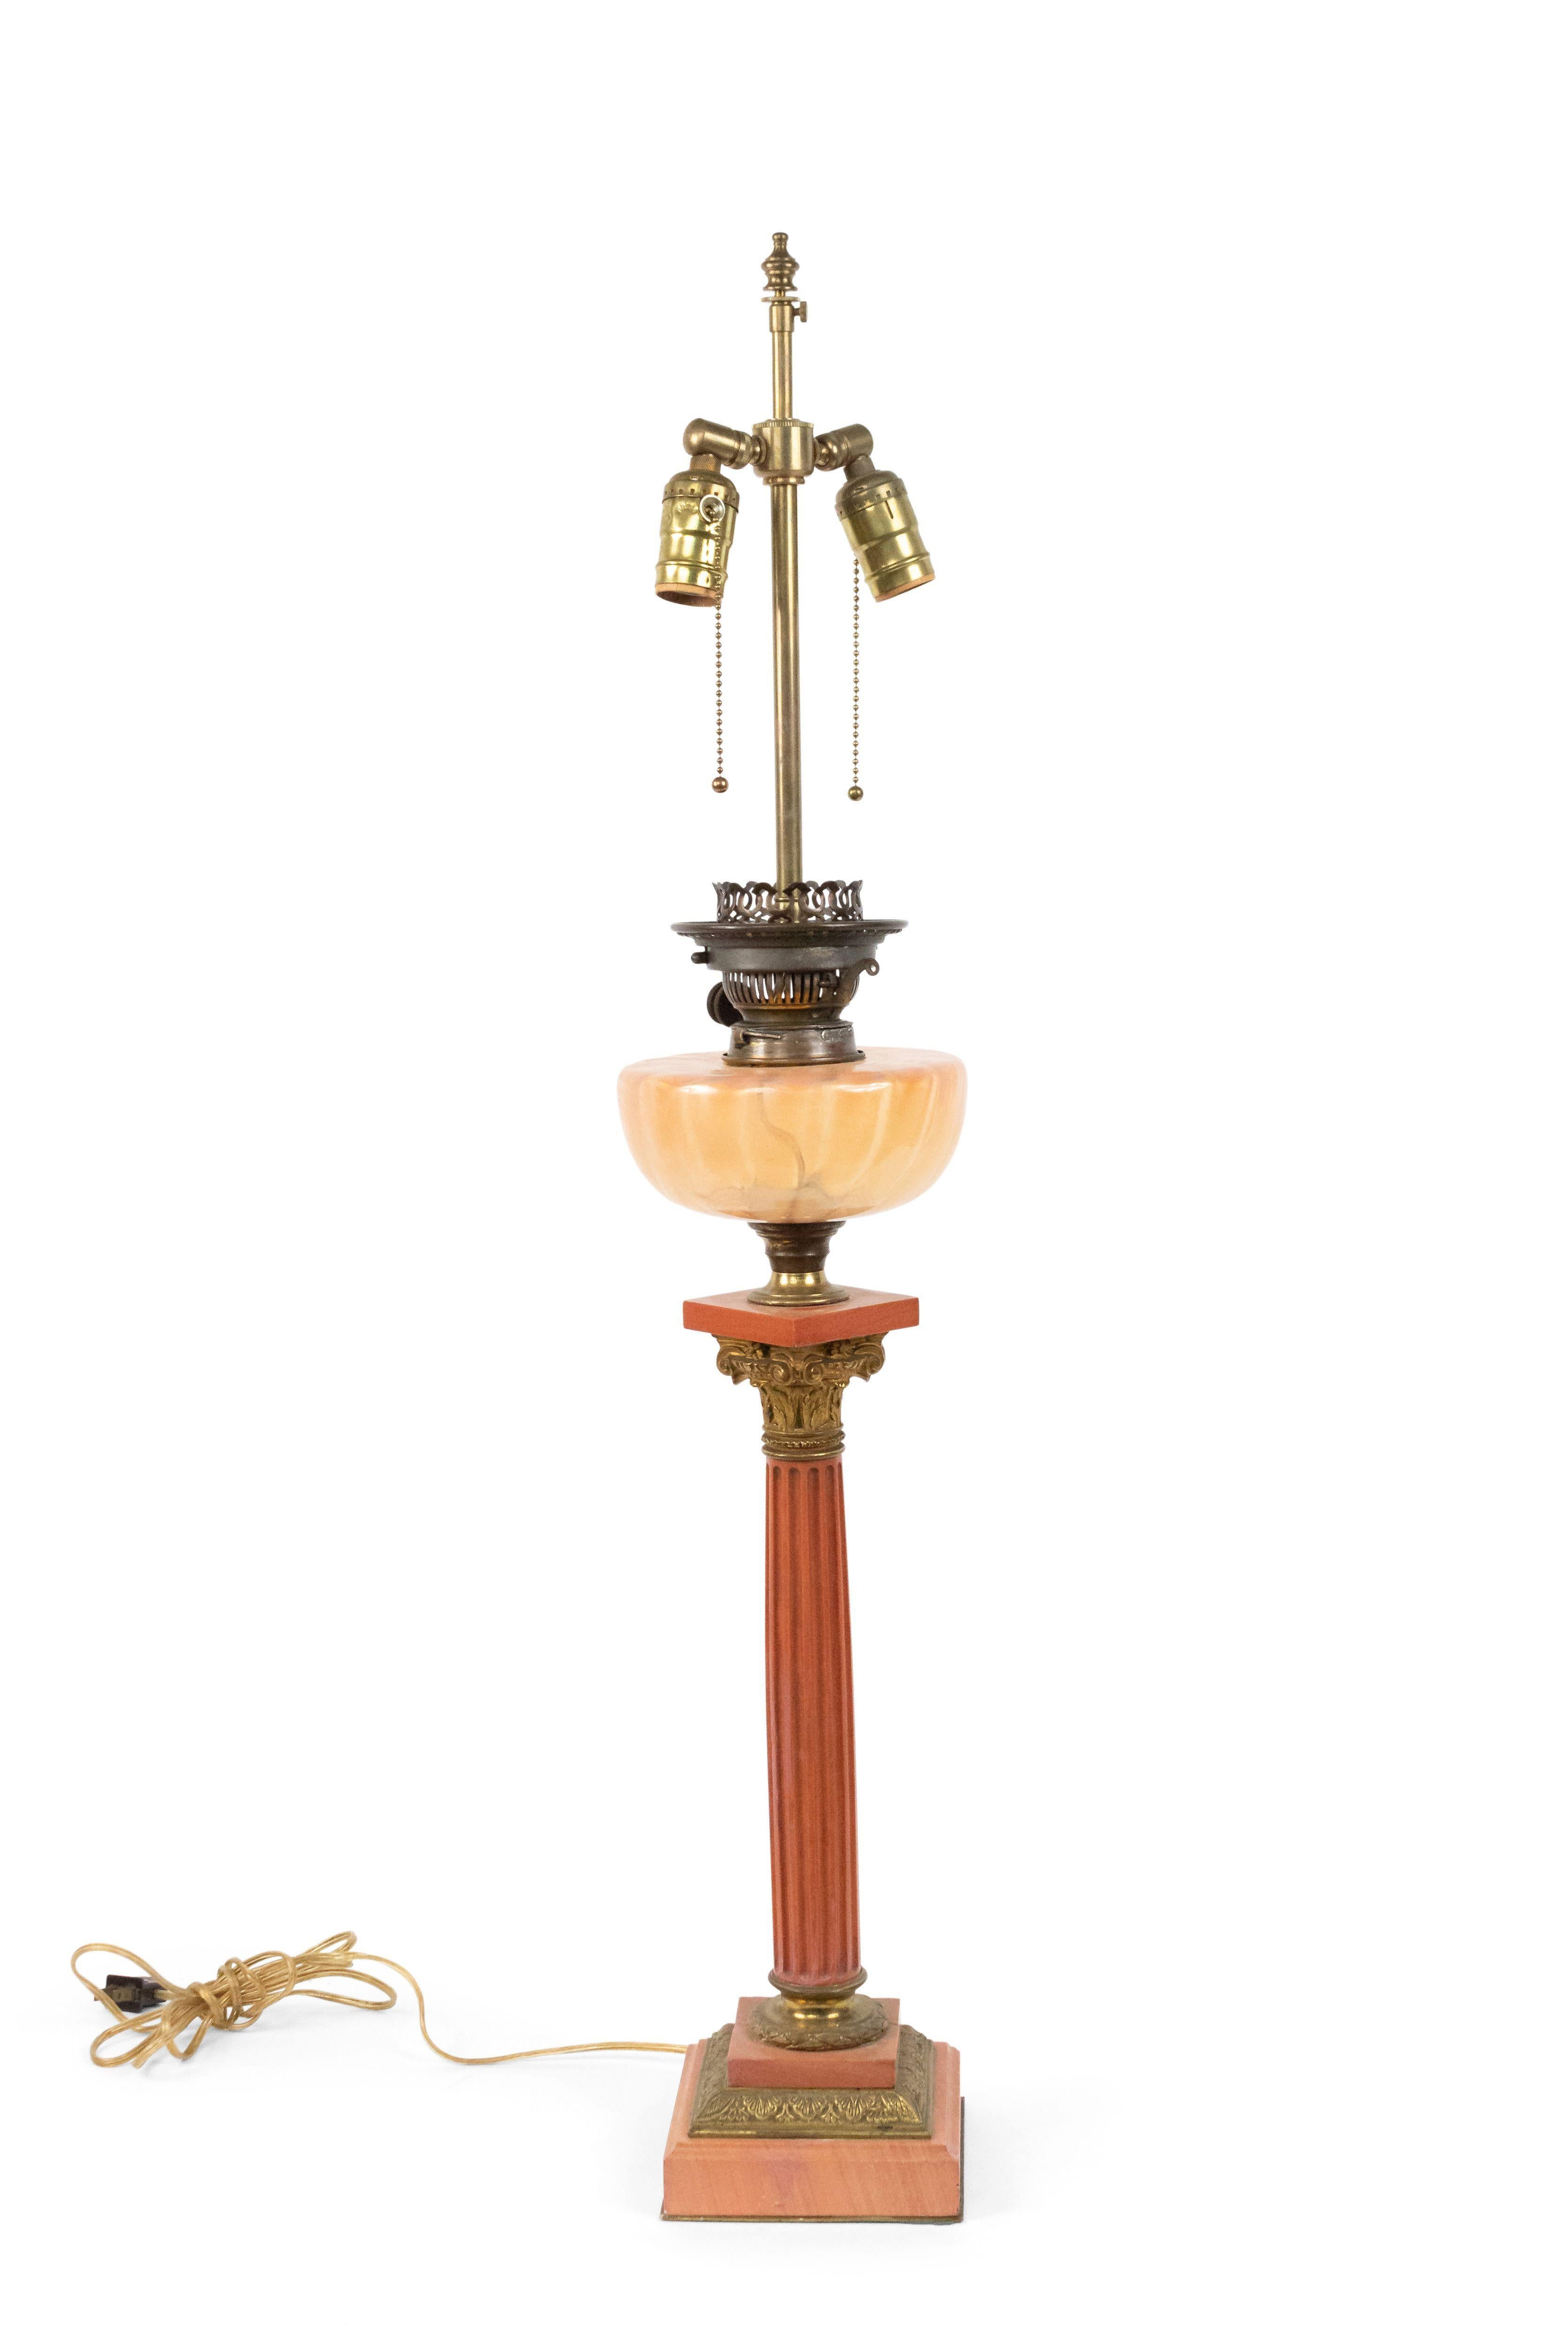 Italian Neo-classic style (19th Century) pink marble fluted column table lamp with bronze trim and font.
